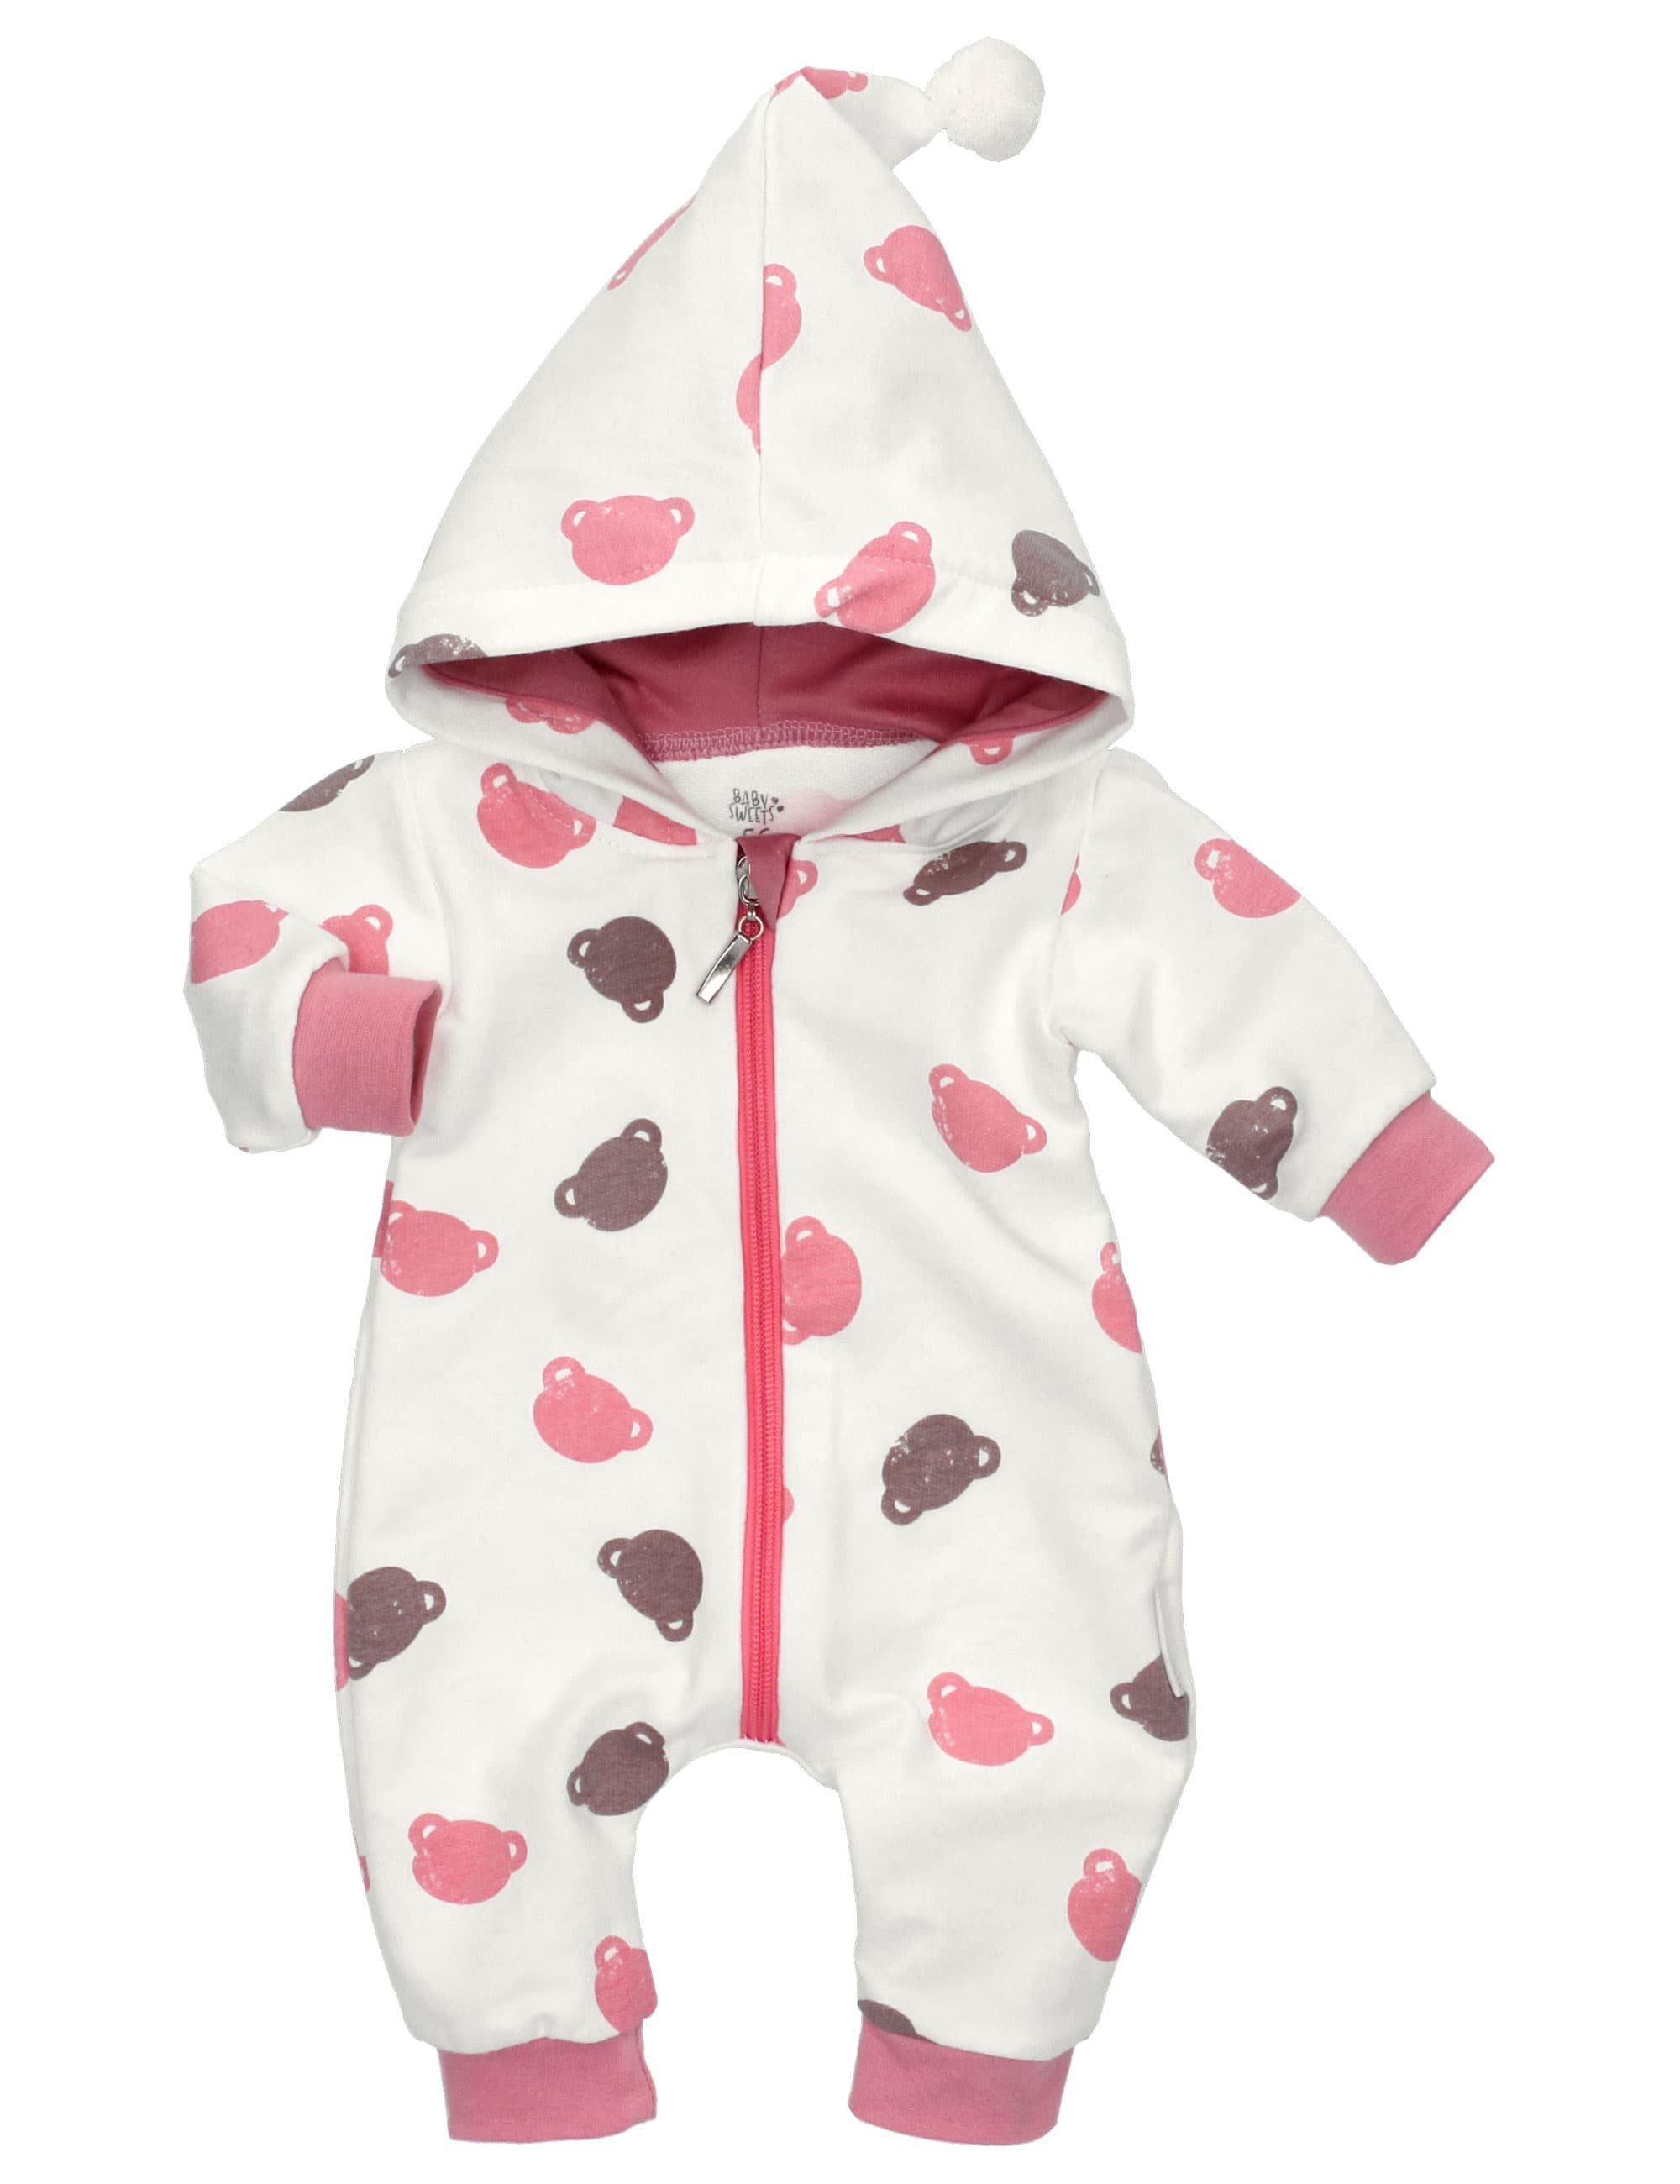 Baby Sweets (1-tlg) weiß Overall Strampler, Koala Overall rosa